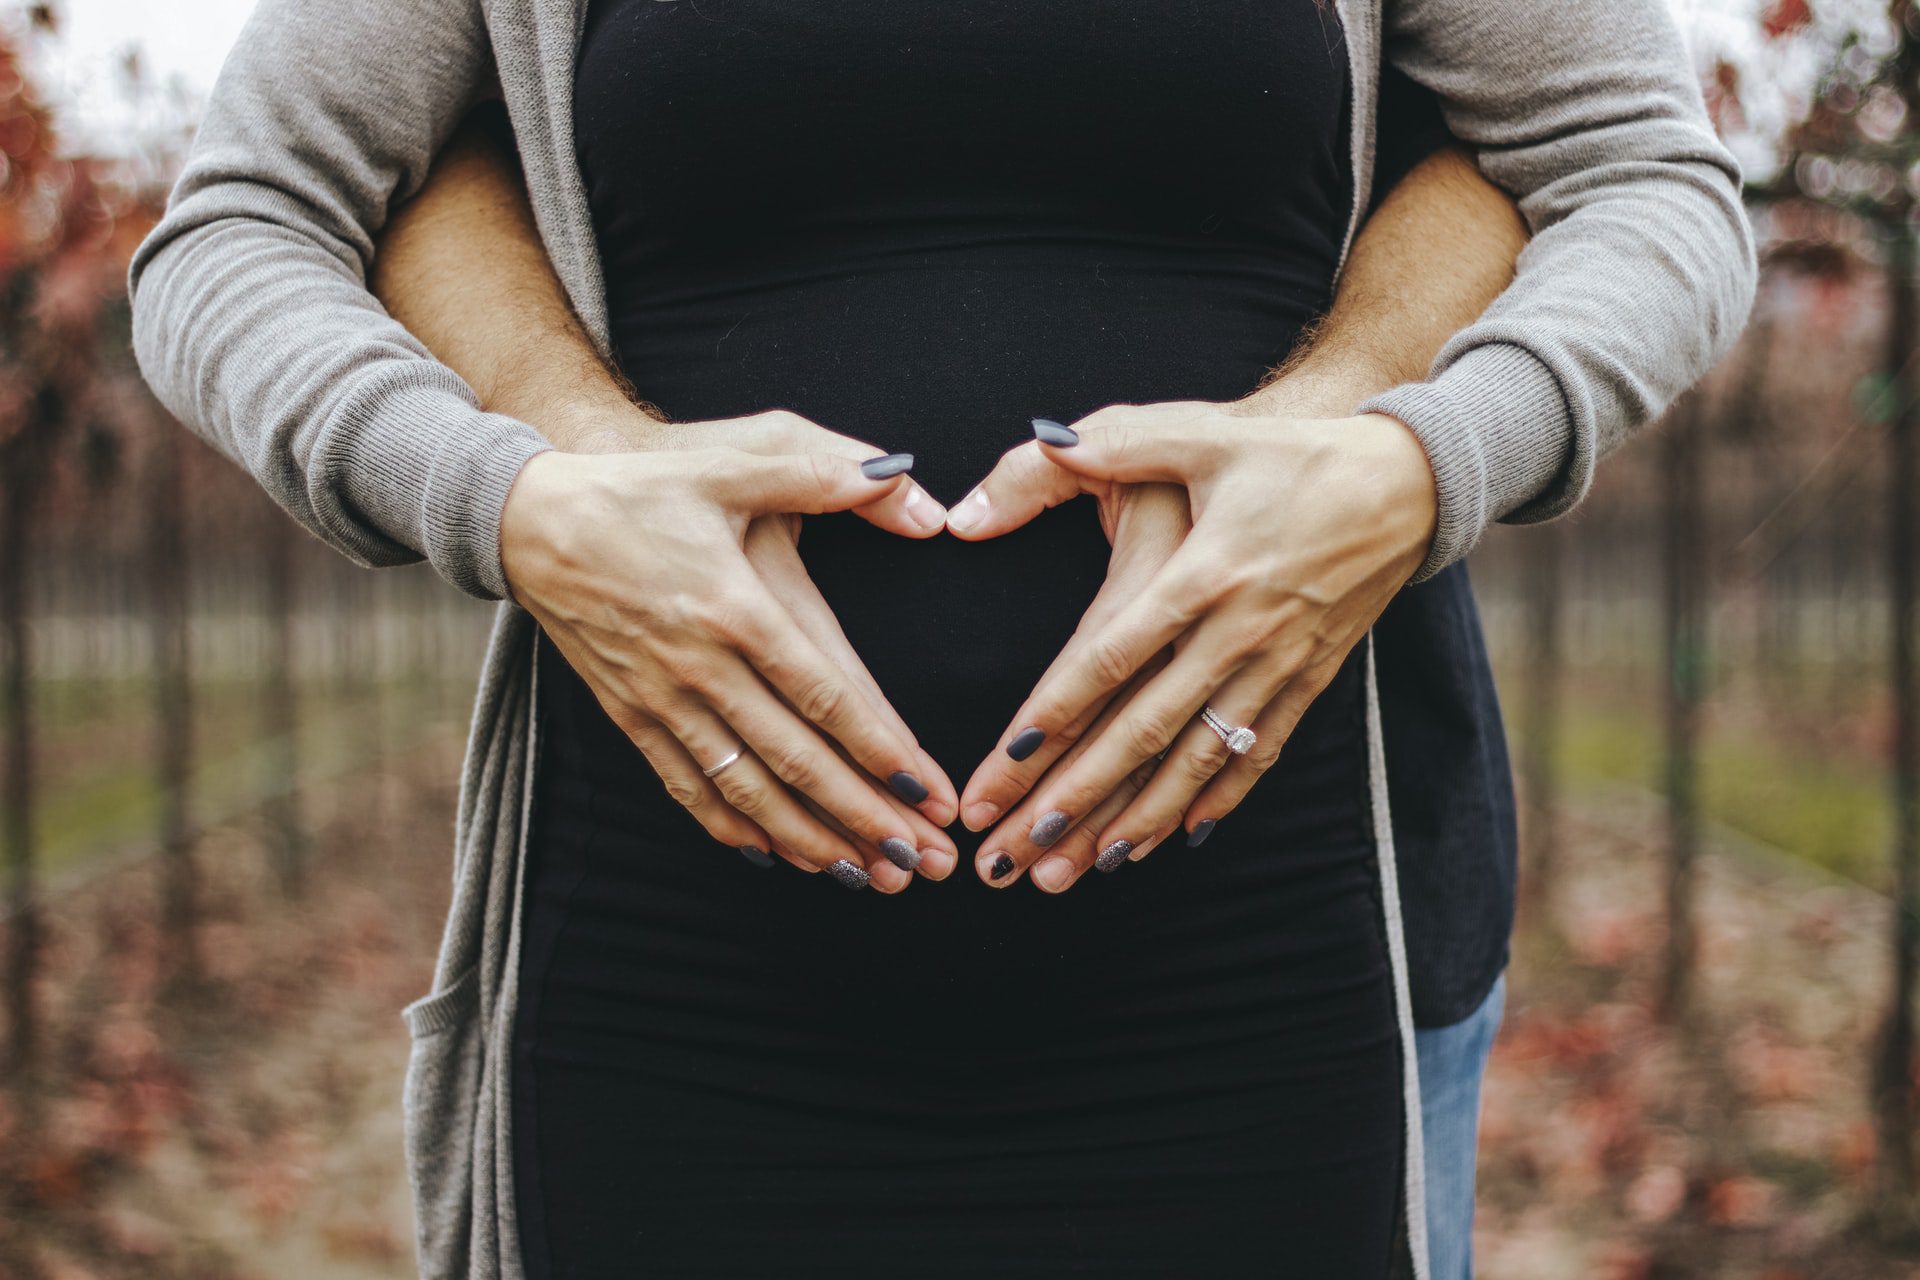 medical marijuana and pregnancy, should you use it?